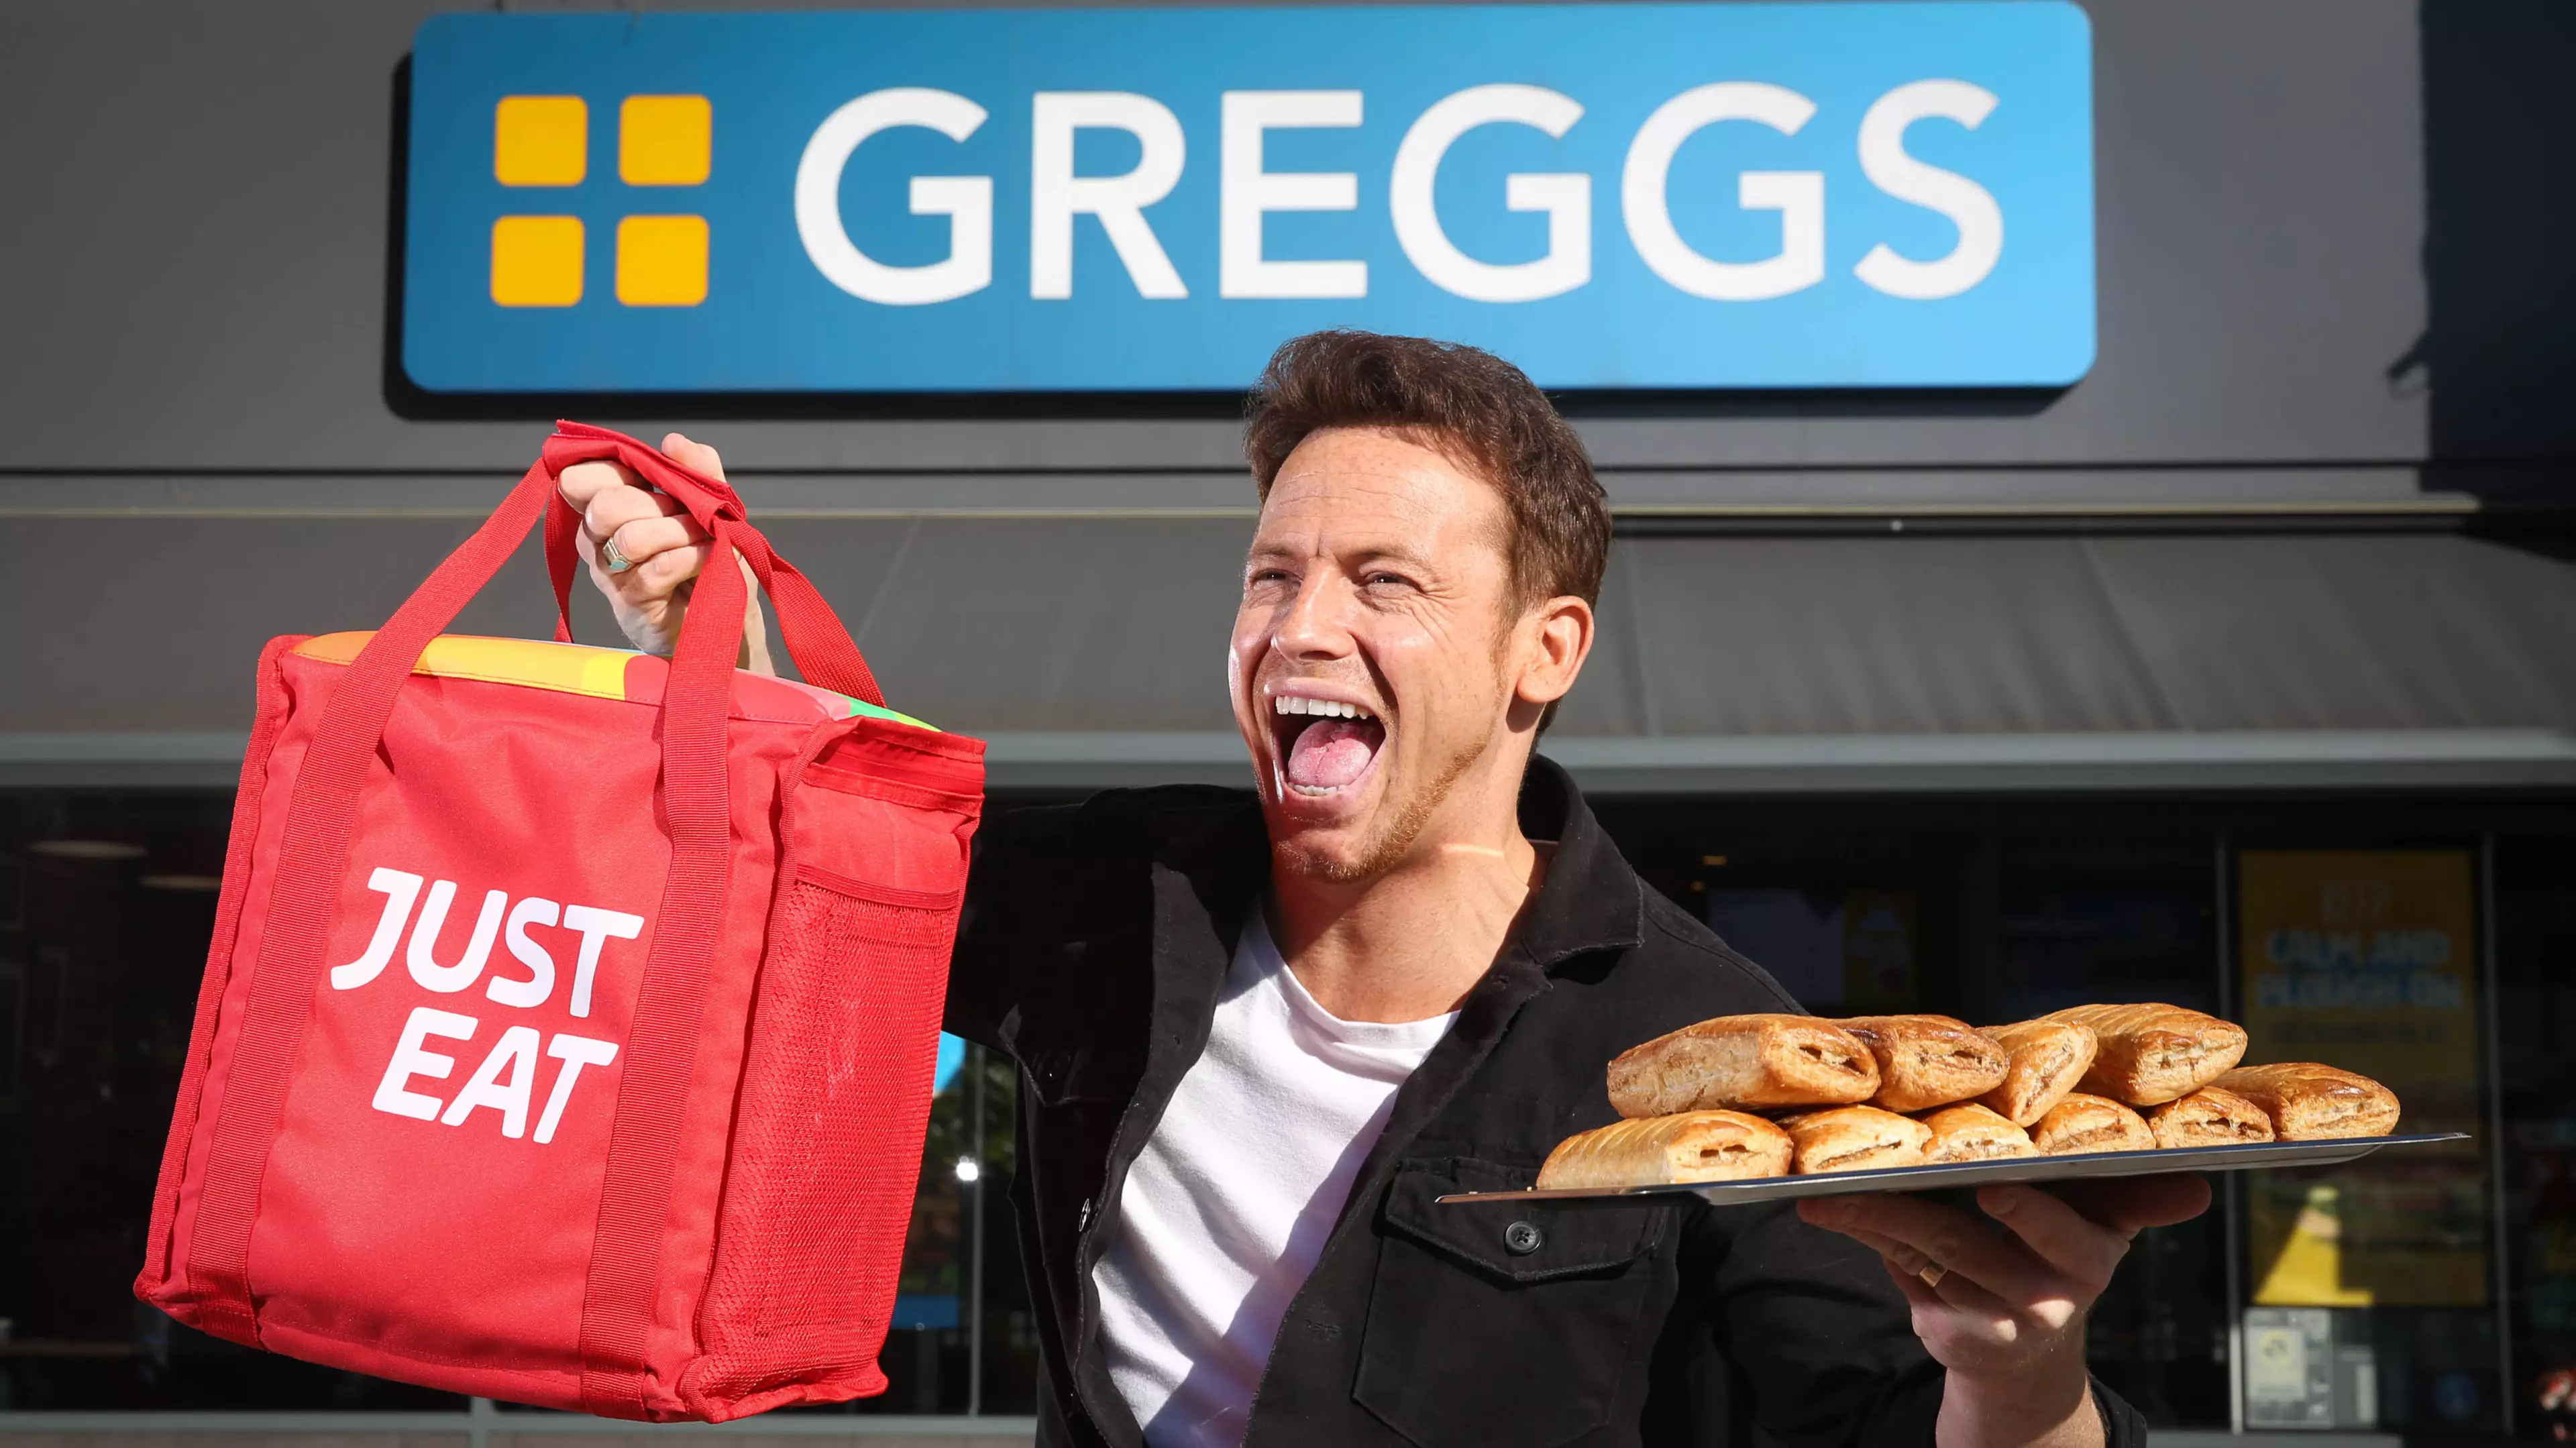 You Can Now Get Greggs Delivered To Your Door On Just Eat